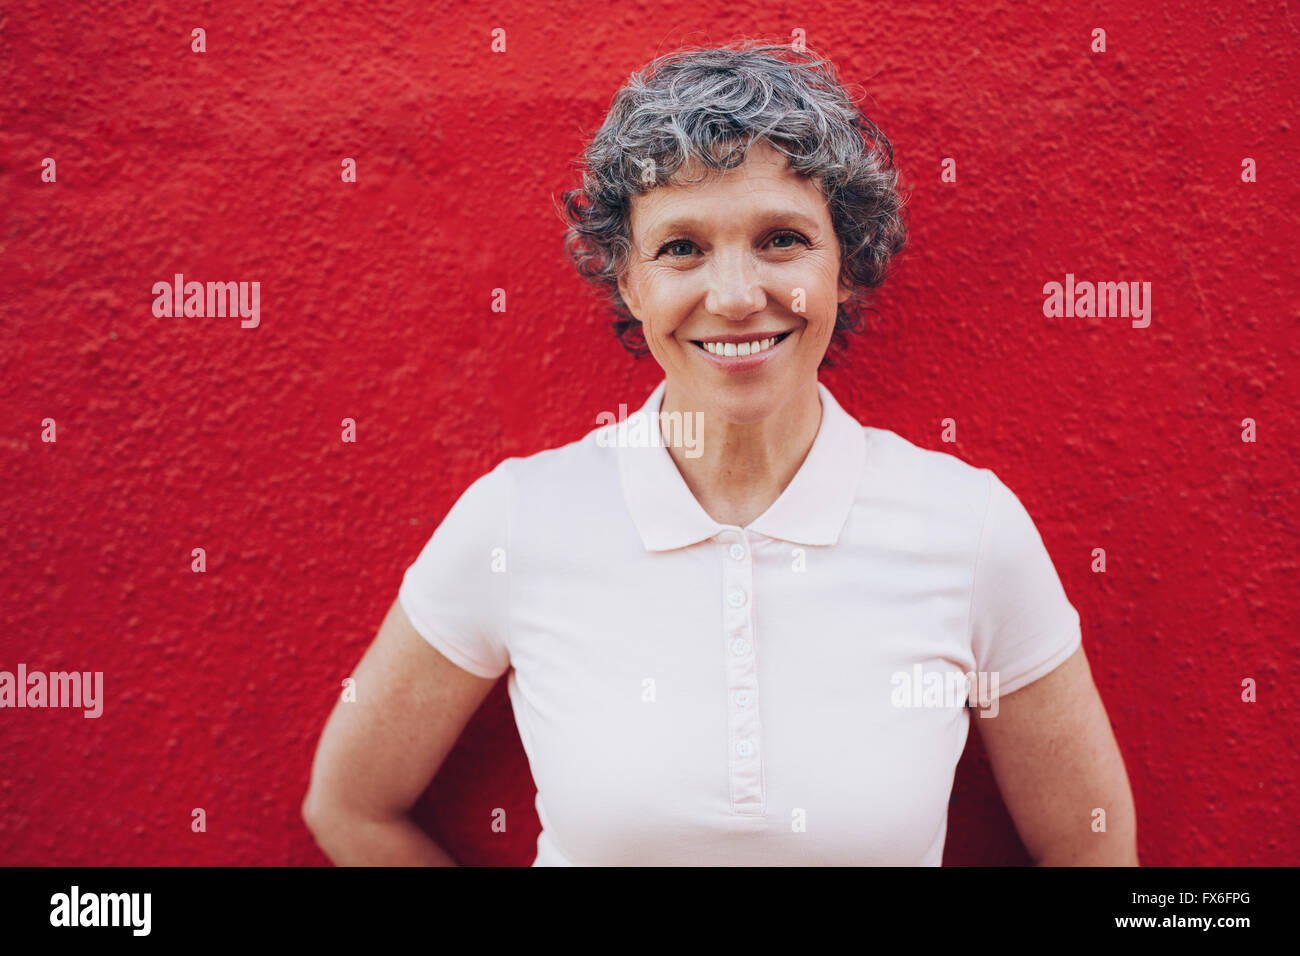 Portrait of senior woman standing against red background. Smiling mid adult female against red wall. Stock Photo